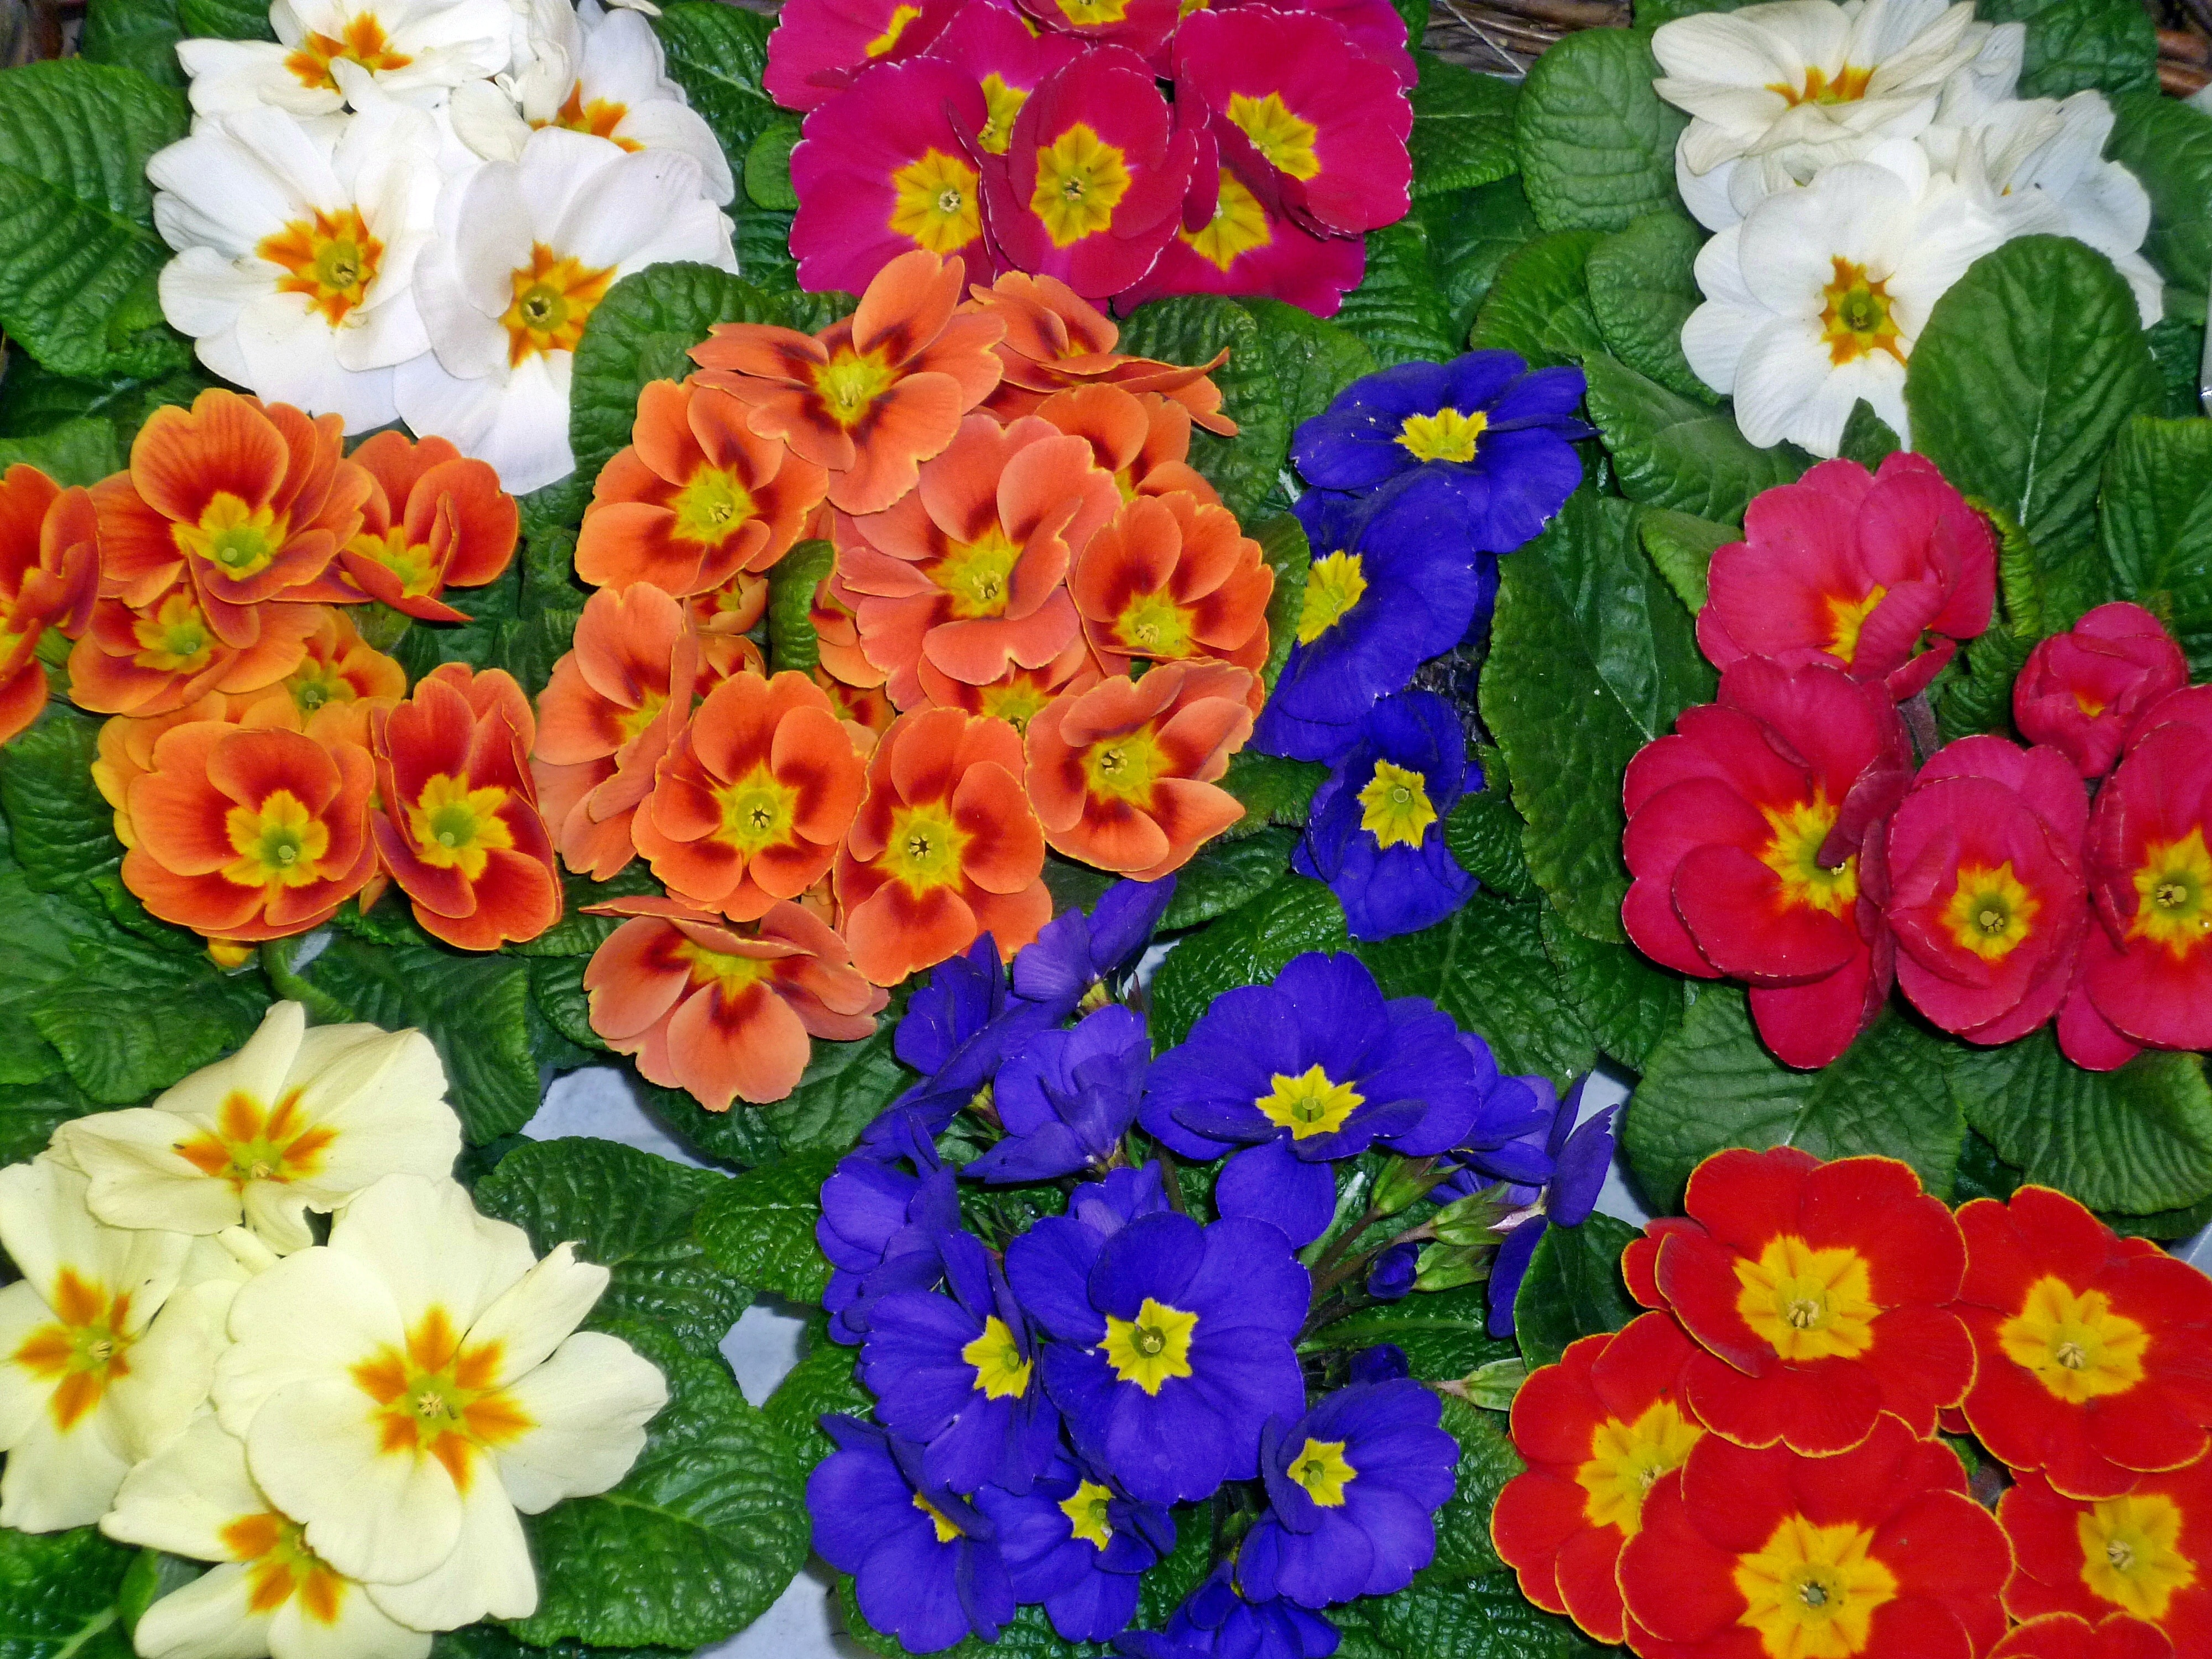 blue, orange, red, and white flowers